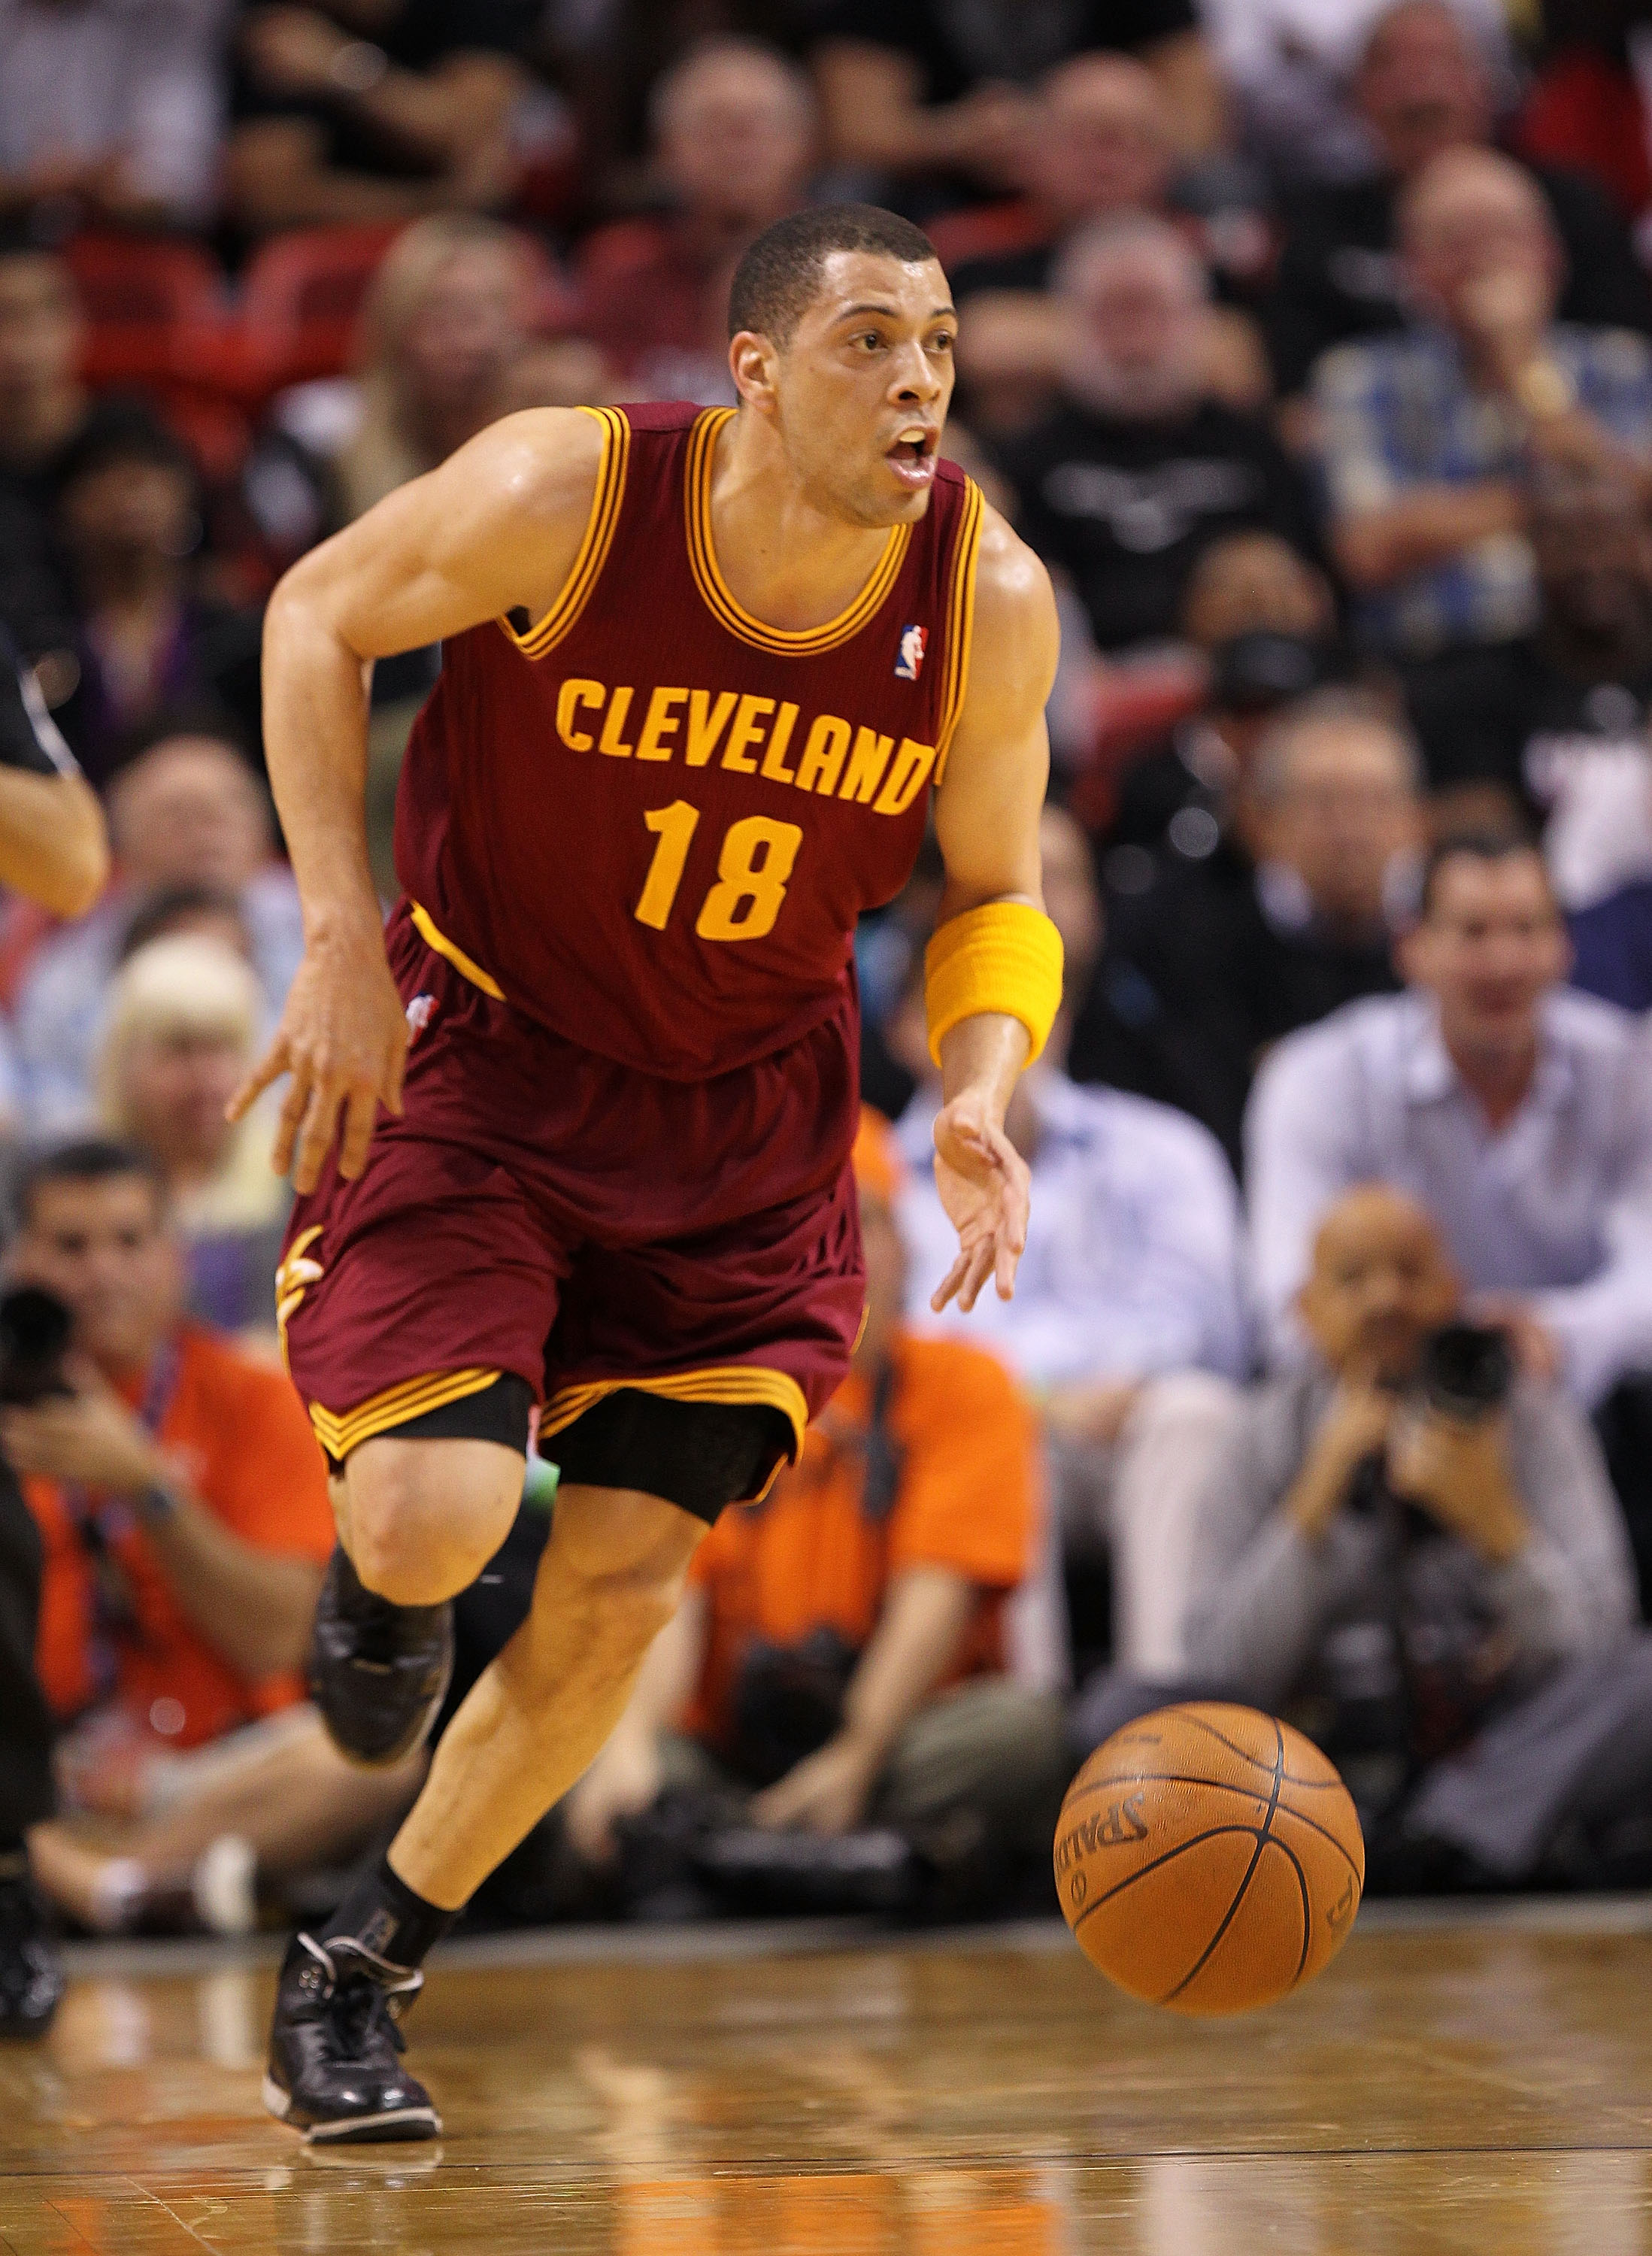 MIAMI, FL - JANUARY 31:  Anthony Parker #18 of the Cleveland Cavaliers brings the ball up the floor during a game against the Miami Heat  at American Airlines Arena on January 31, 2011 in Miami, Florida. NOTE TO USER: User expressly acknowledges and agree